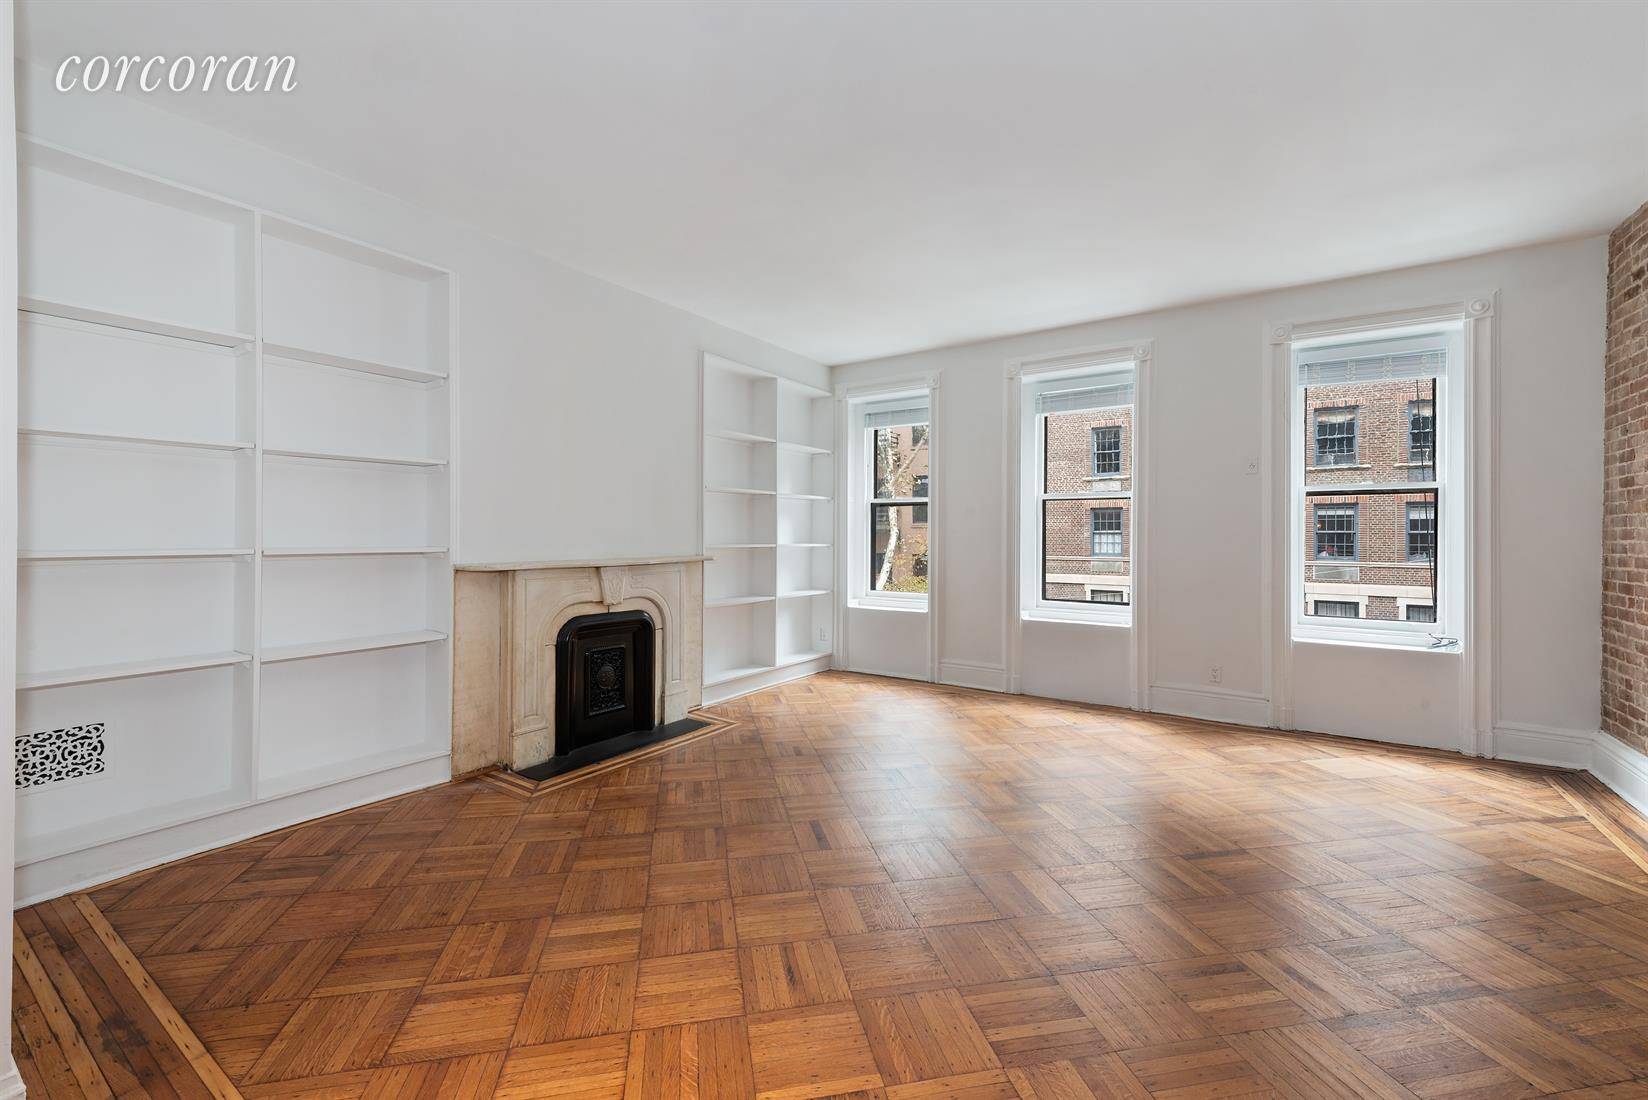 First offering of a fully renovated townhouse duplex apartment with a terrace located in the middle of a tree lined Upper East Side block lined with elegant townhouses.